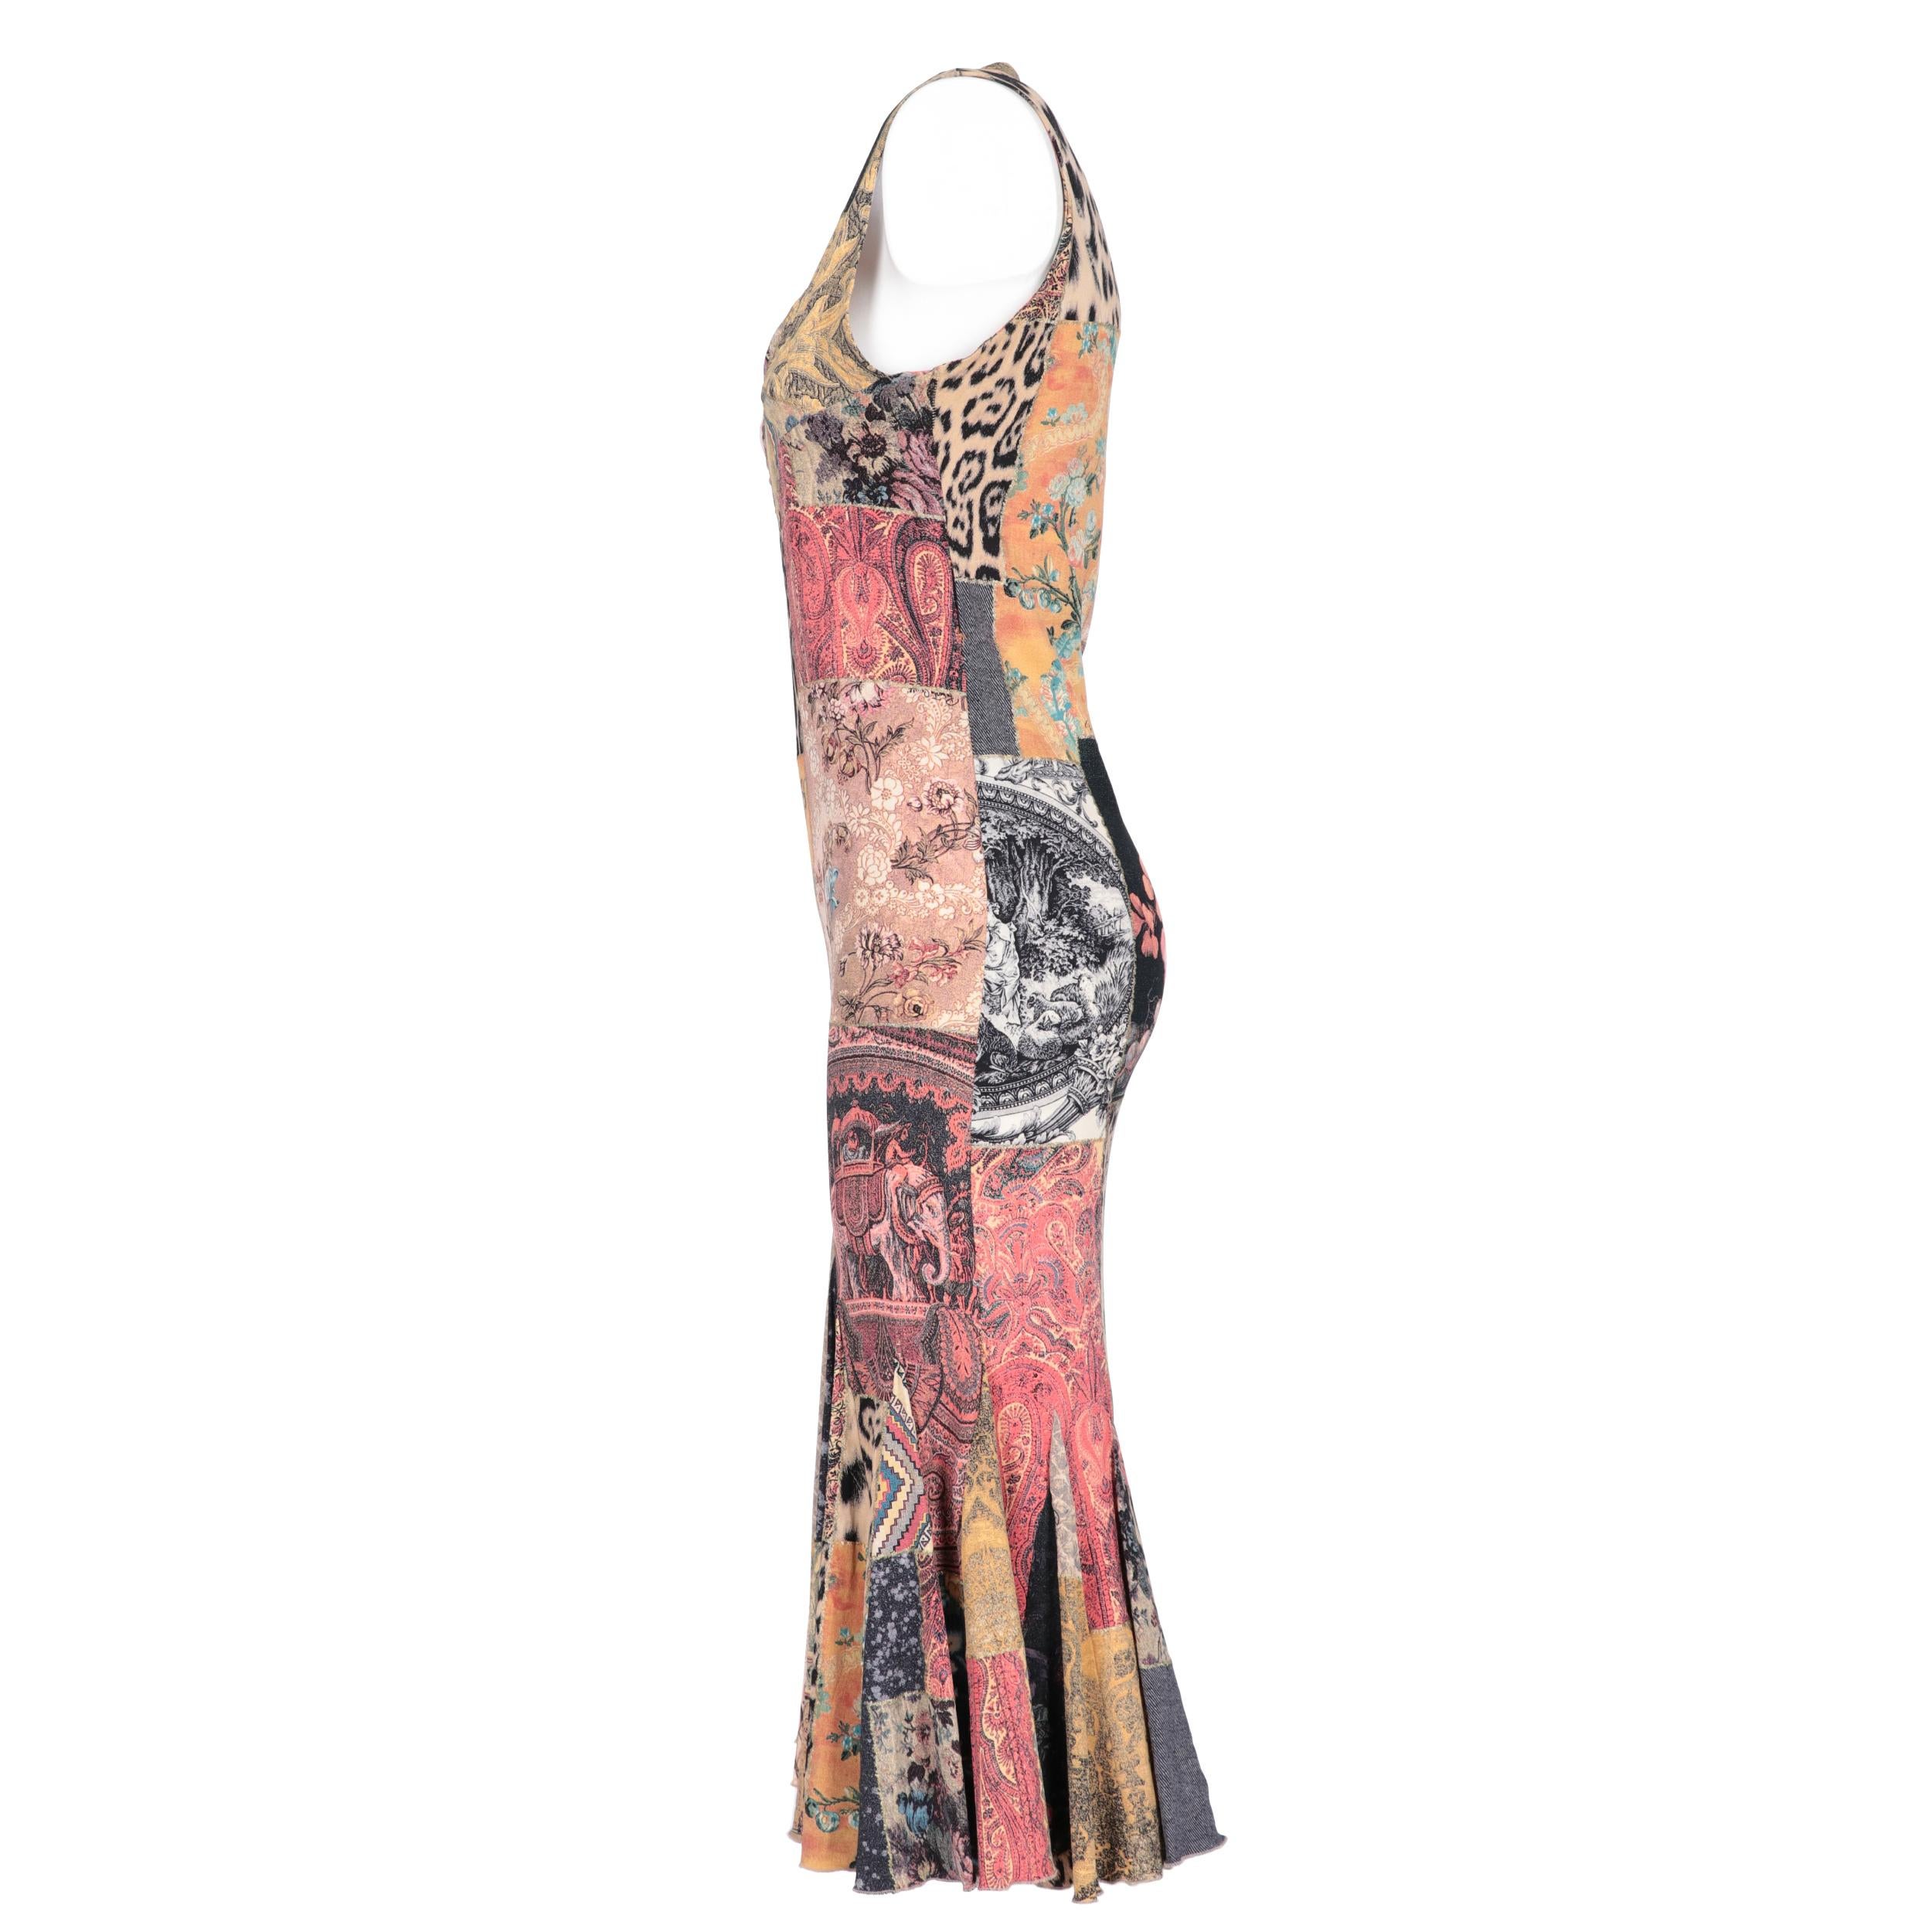 Roberto Cavalli silk blend dress with a mix of multicolored prints. Model with round neckline, sleeveless and flared skirt.
Years: 90s

Made in Italy

Size: L

Flat measurements

Height: 118 cm
Bust: 41 cm
